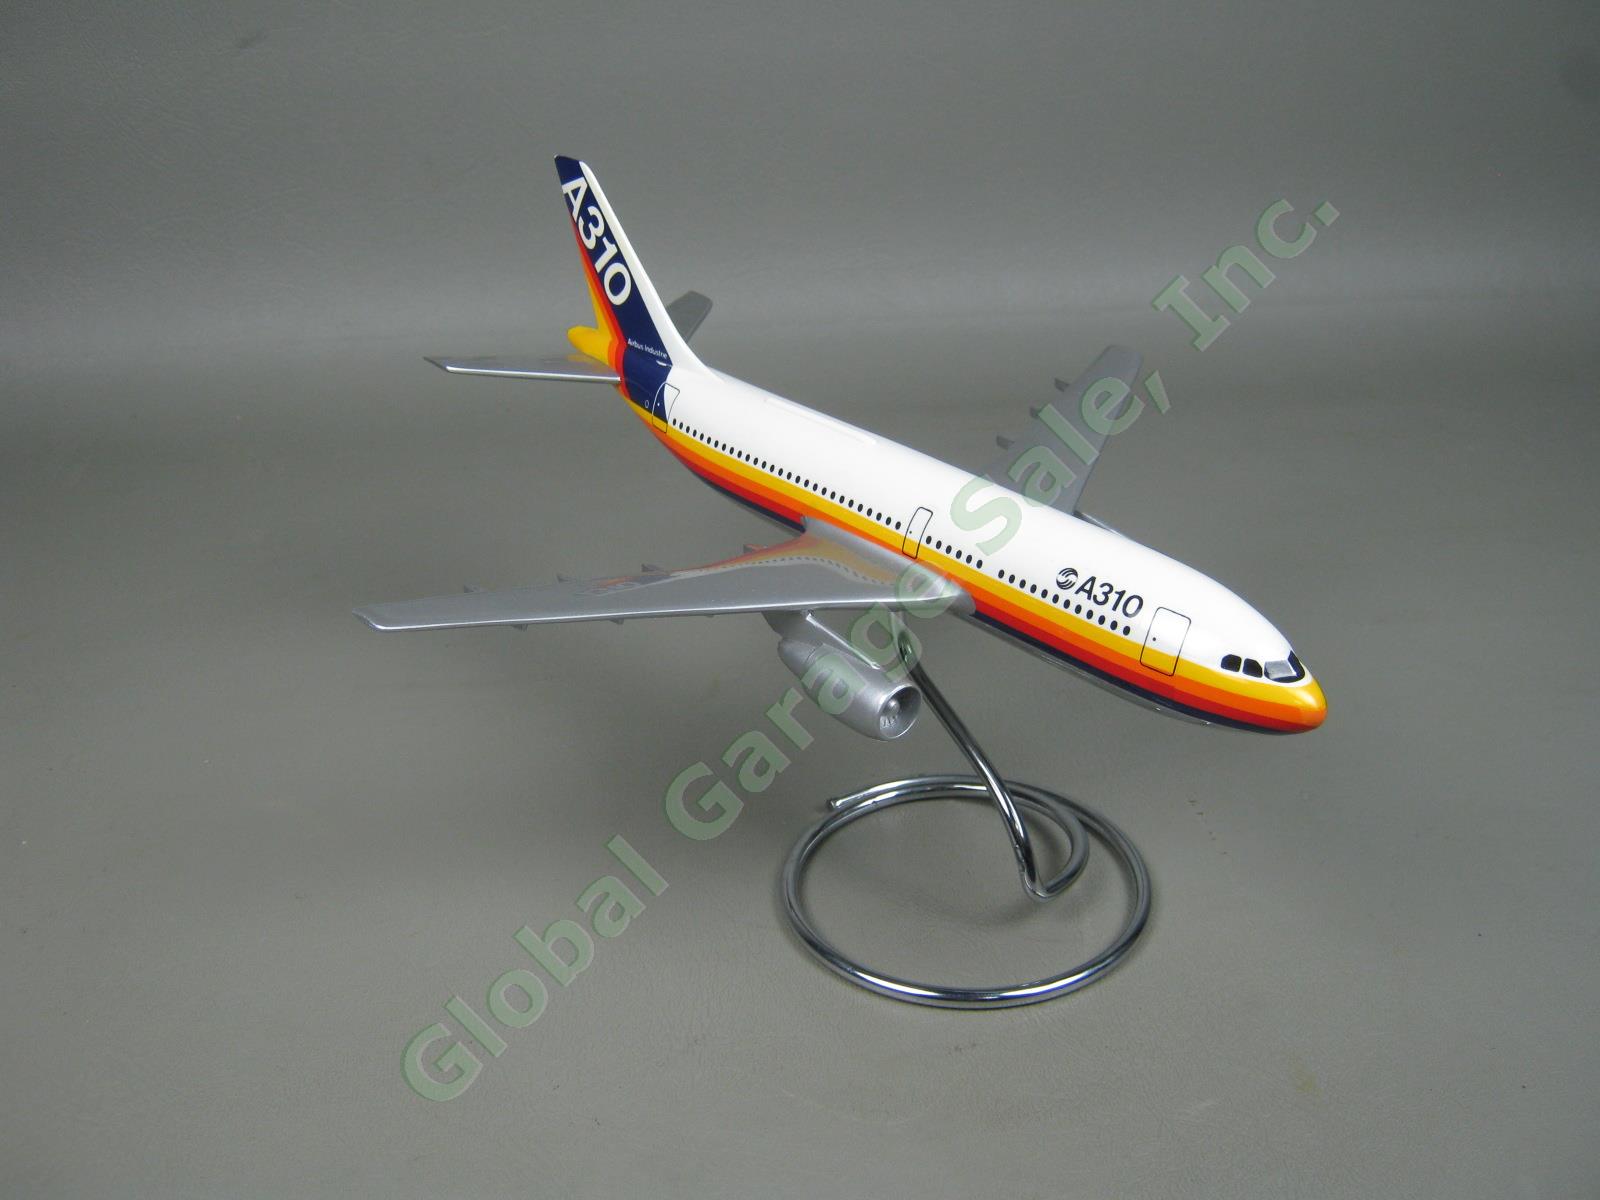 Airbus Industrie A310-203 Desktop Display Model Airline Aircraft Airplane 9.25"